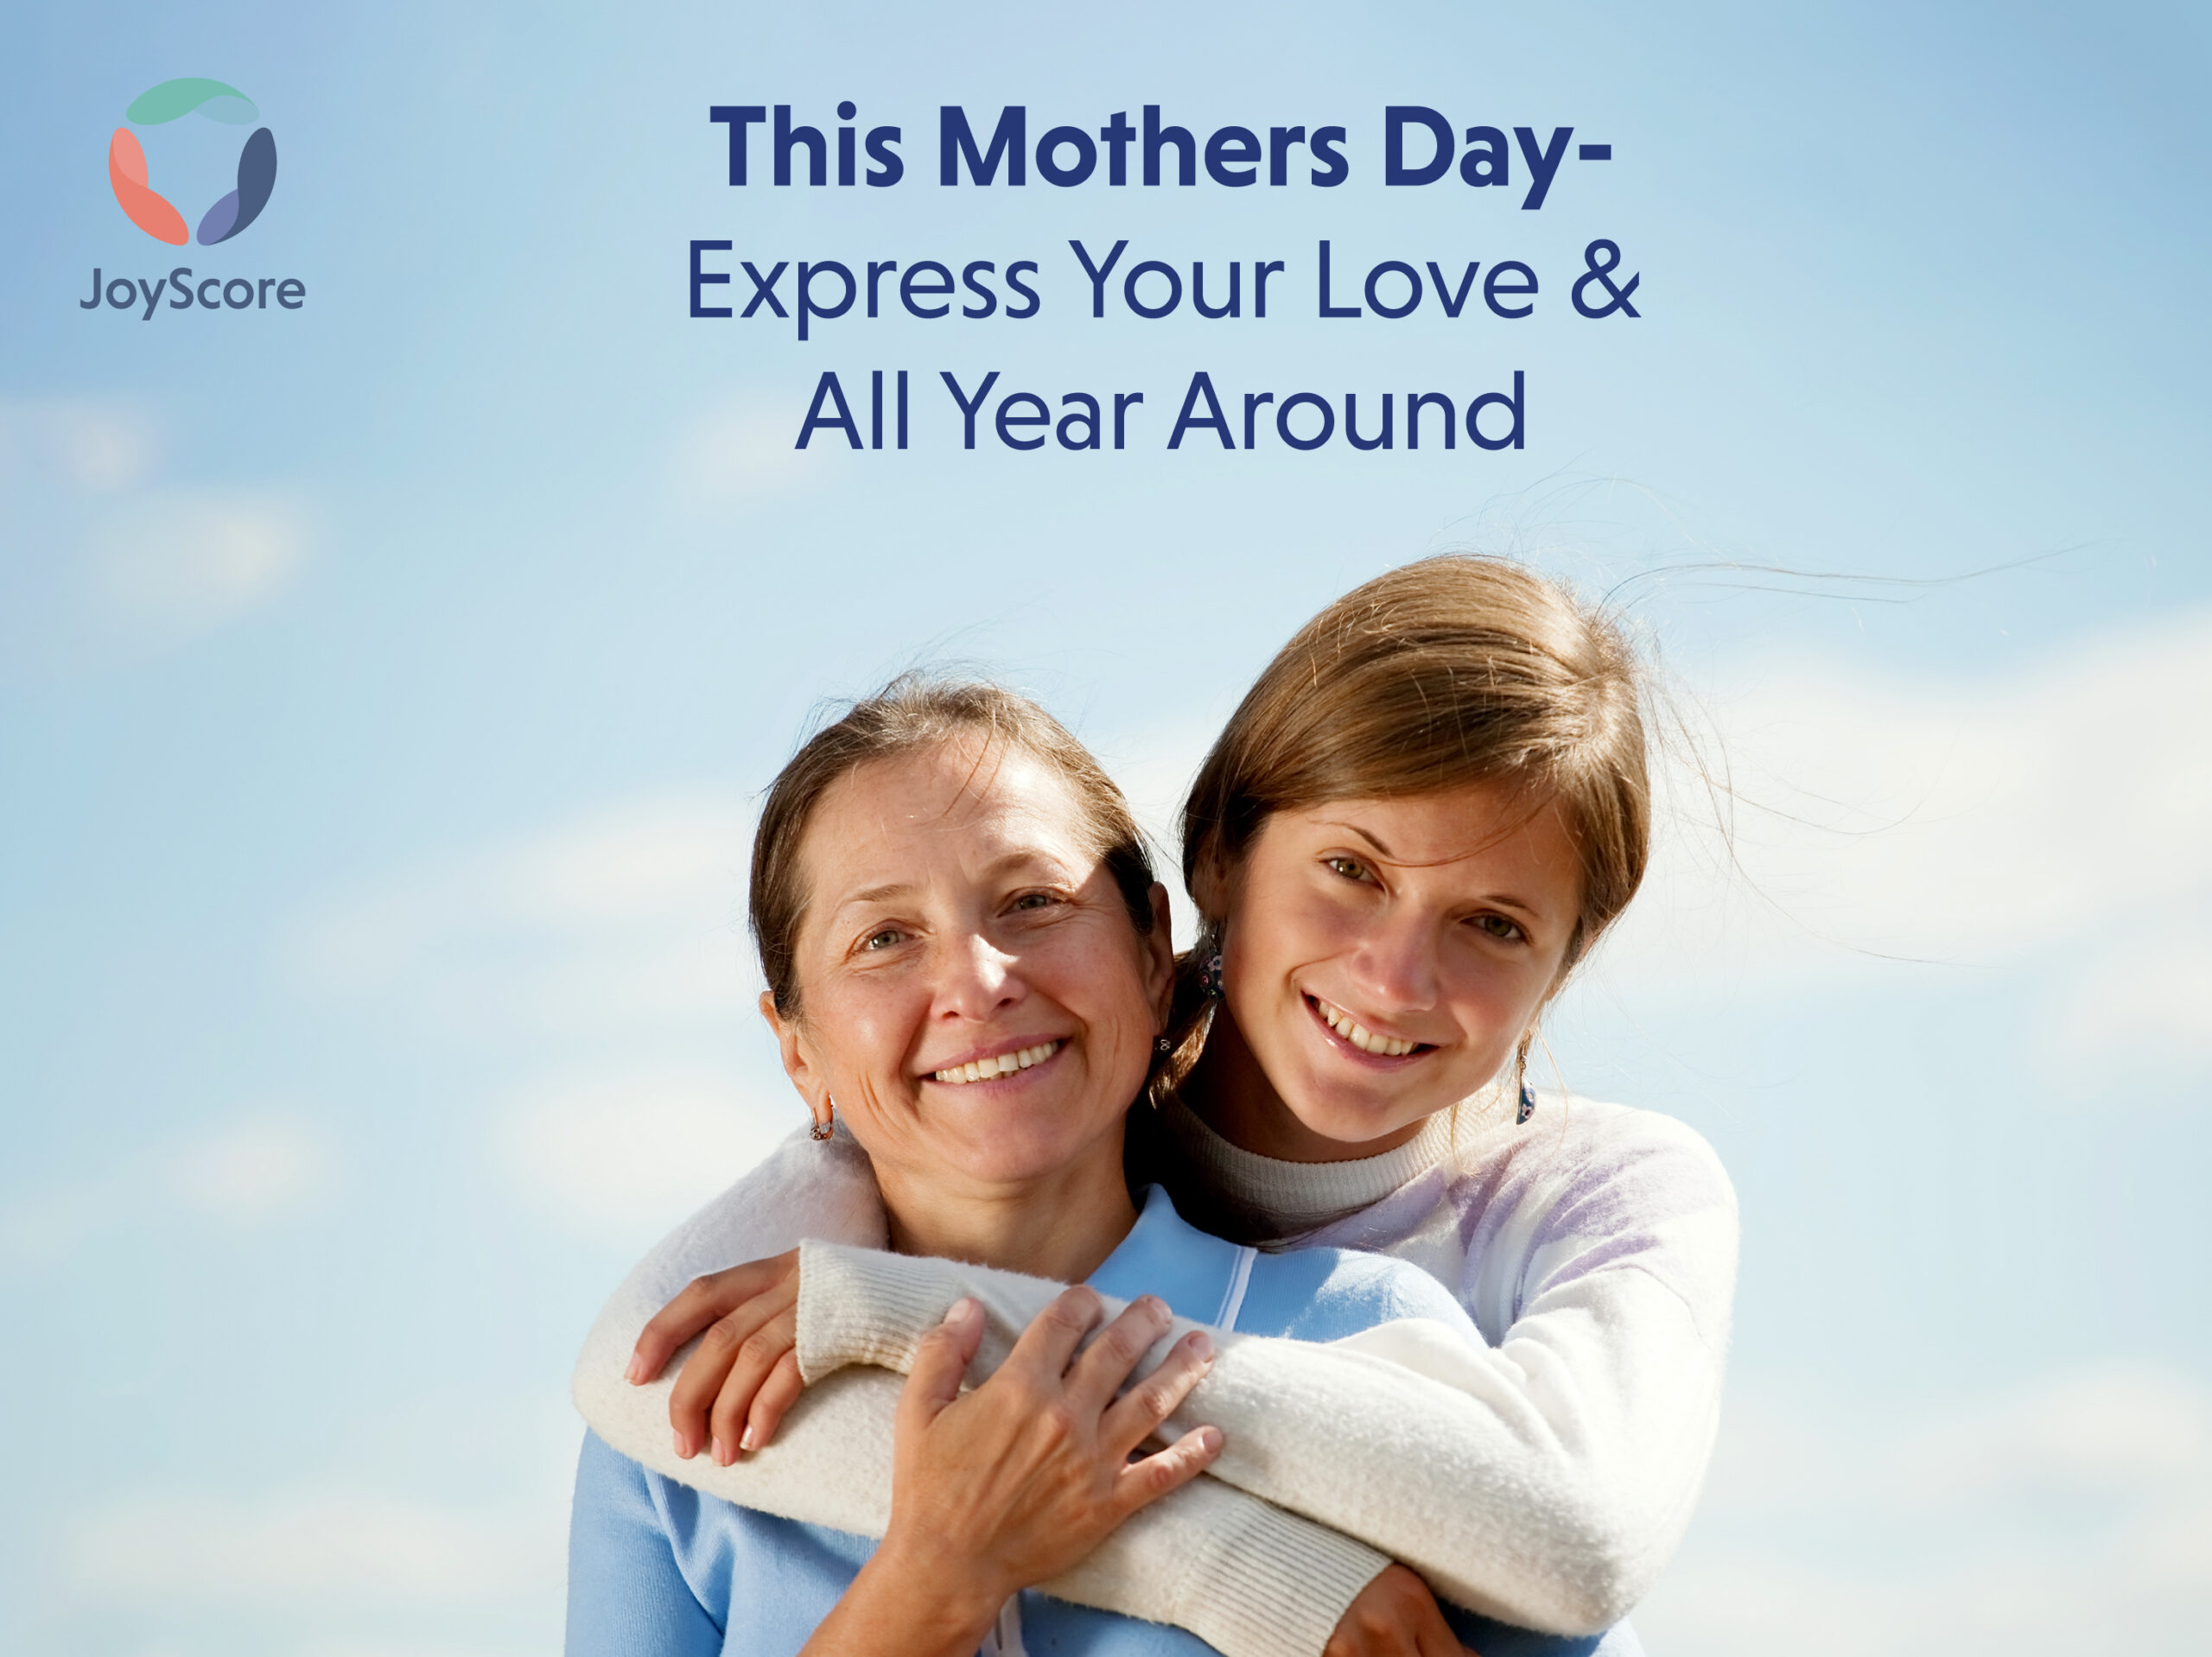 Love your mom this mother’s day and express your love all around the year